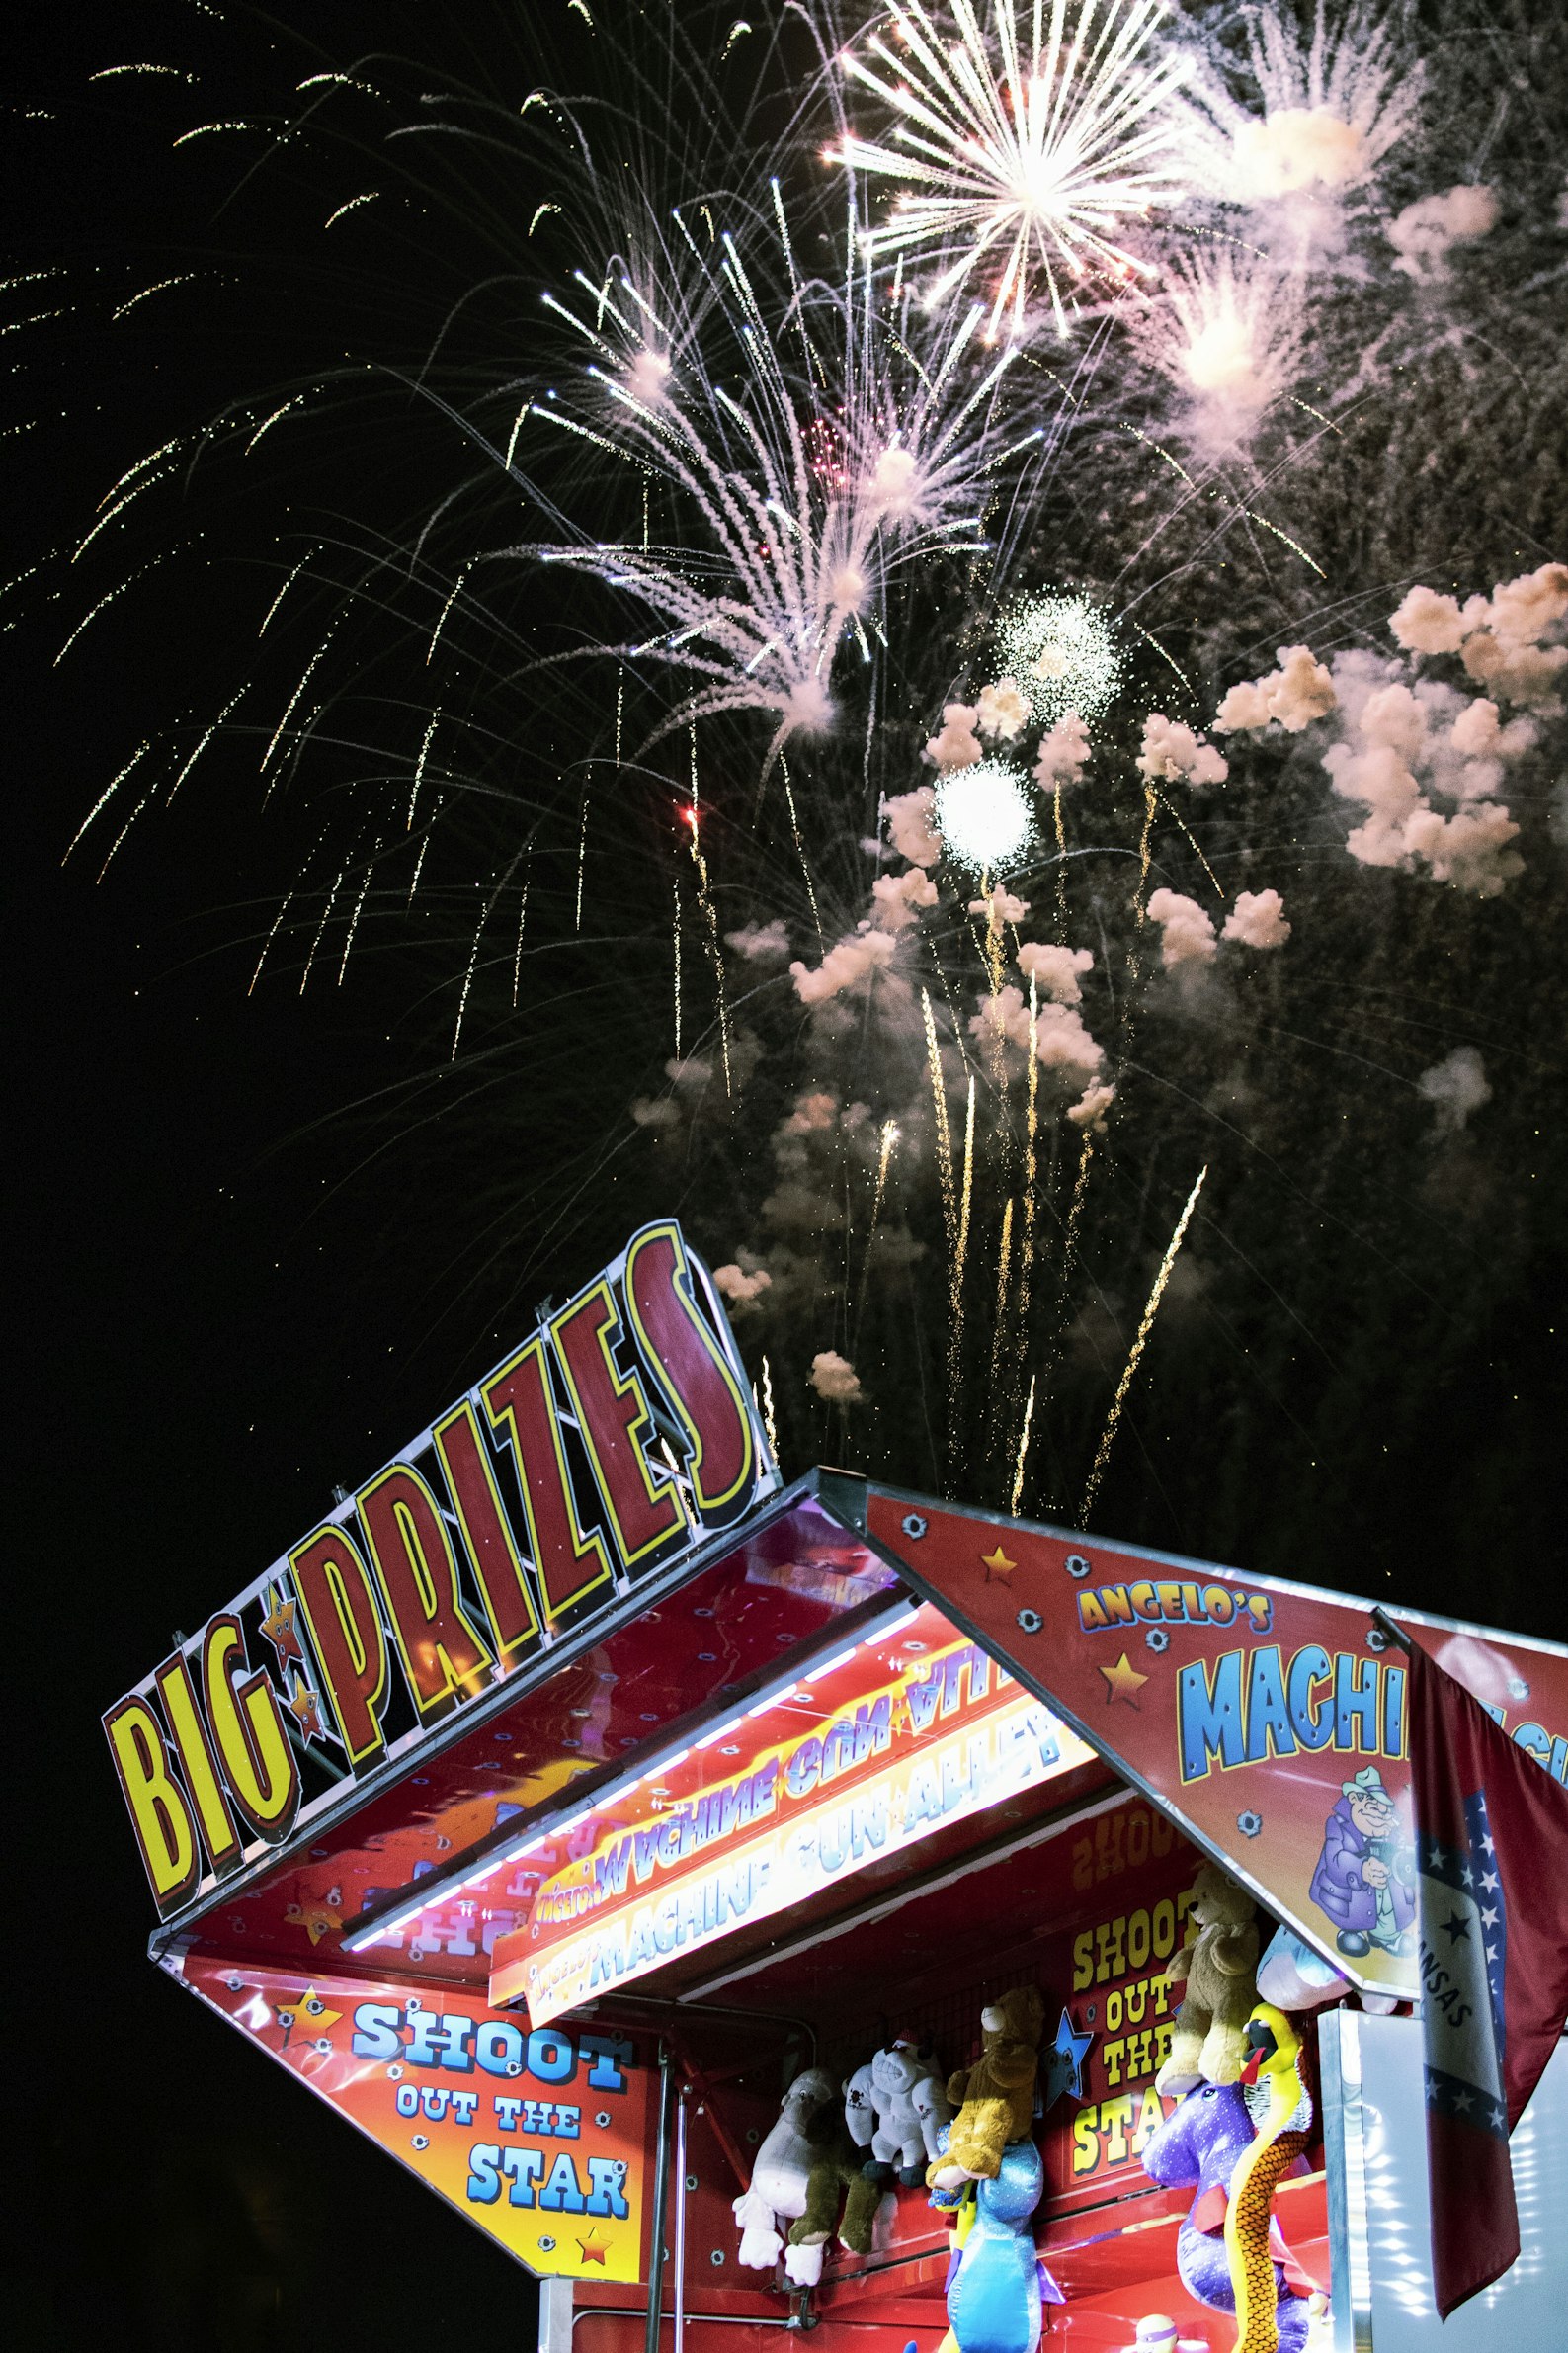 Fairground prizes booth with fireworks